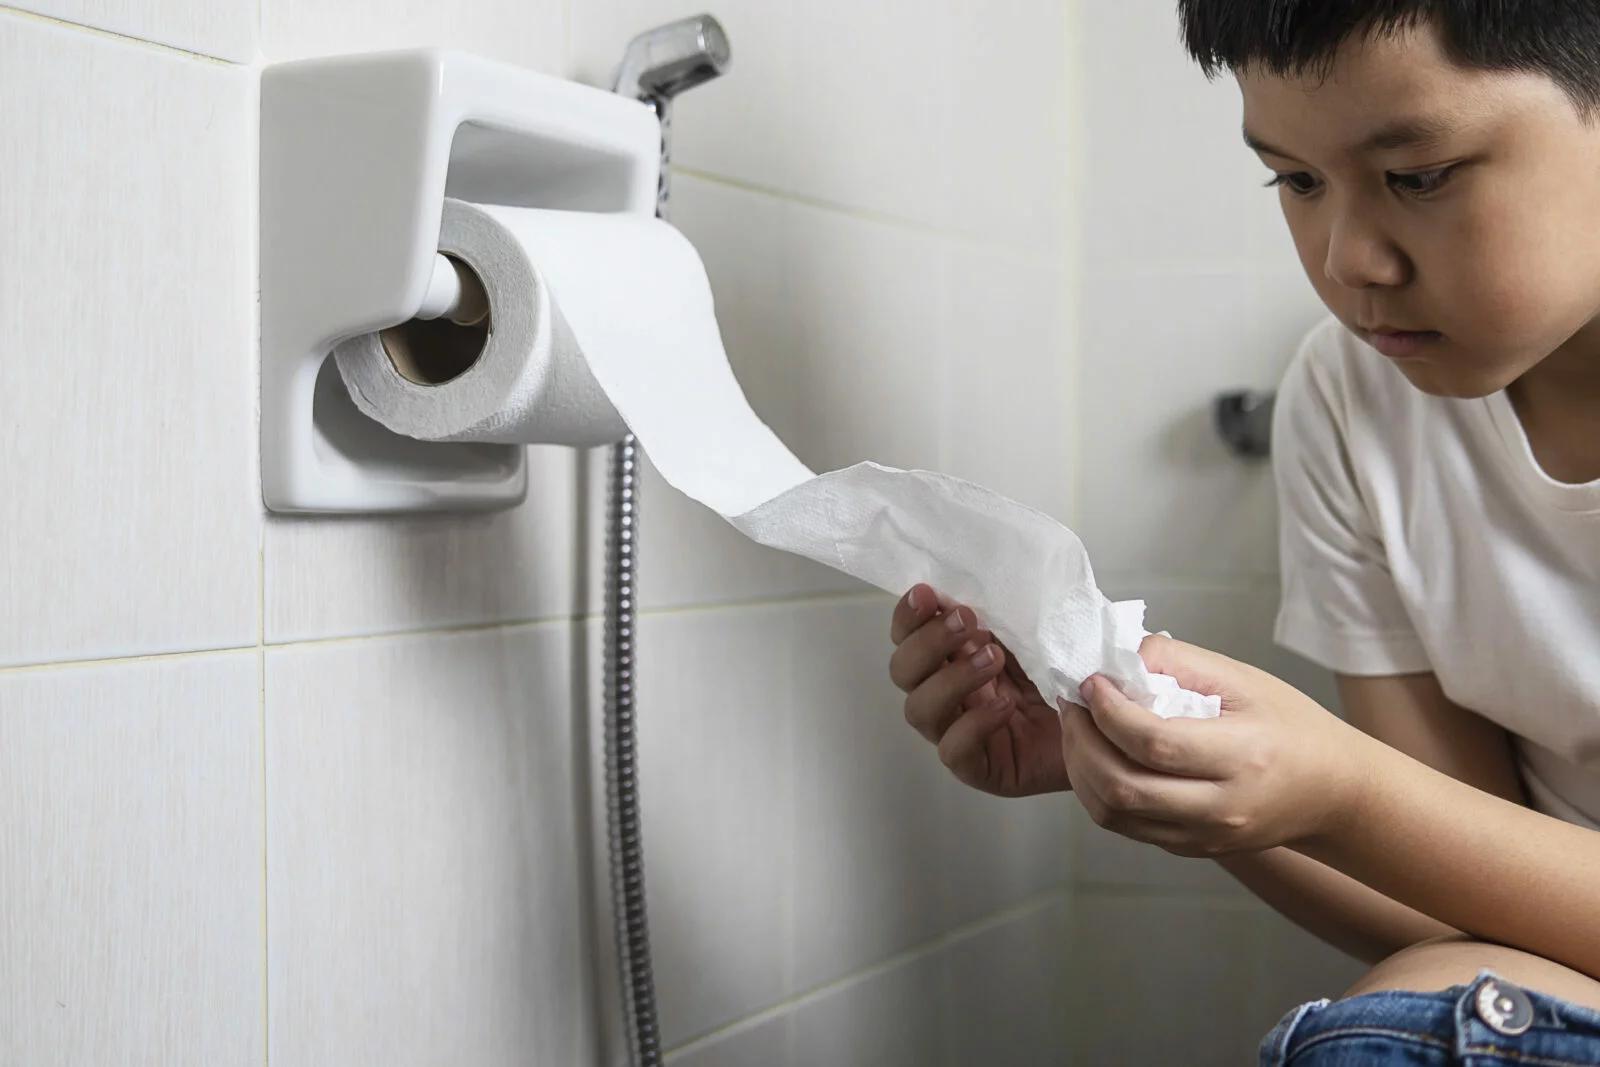 Asian boy sitting on toilet bowl holding tissue paper  - health problem concept